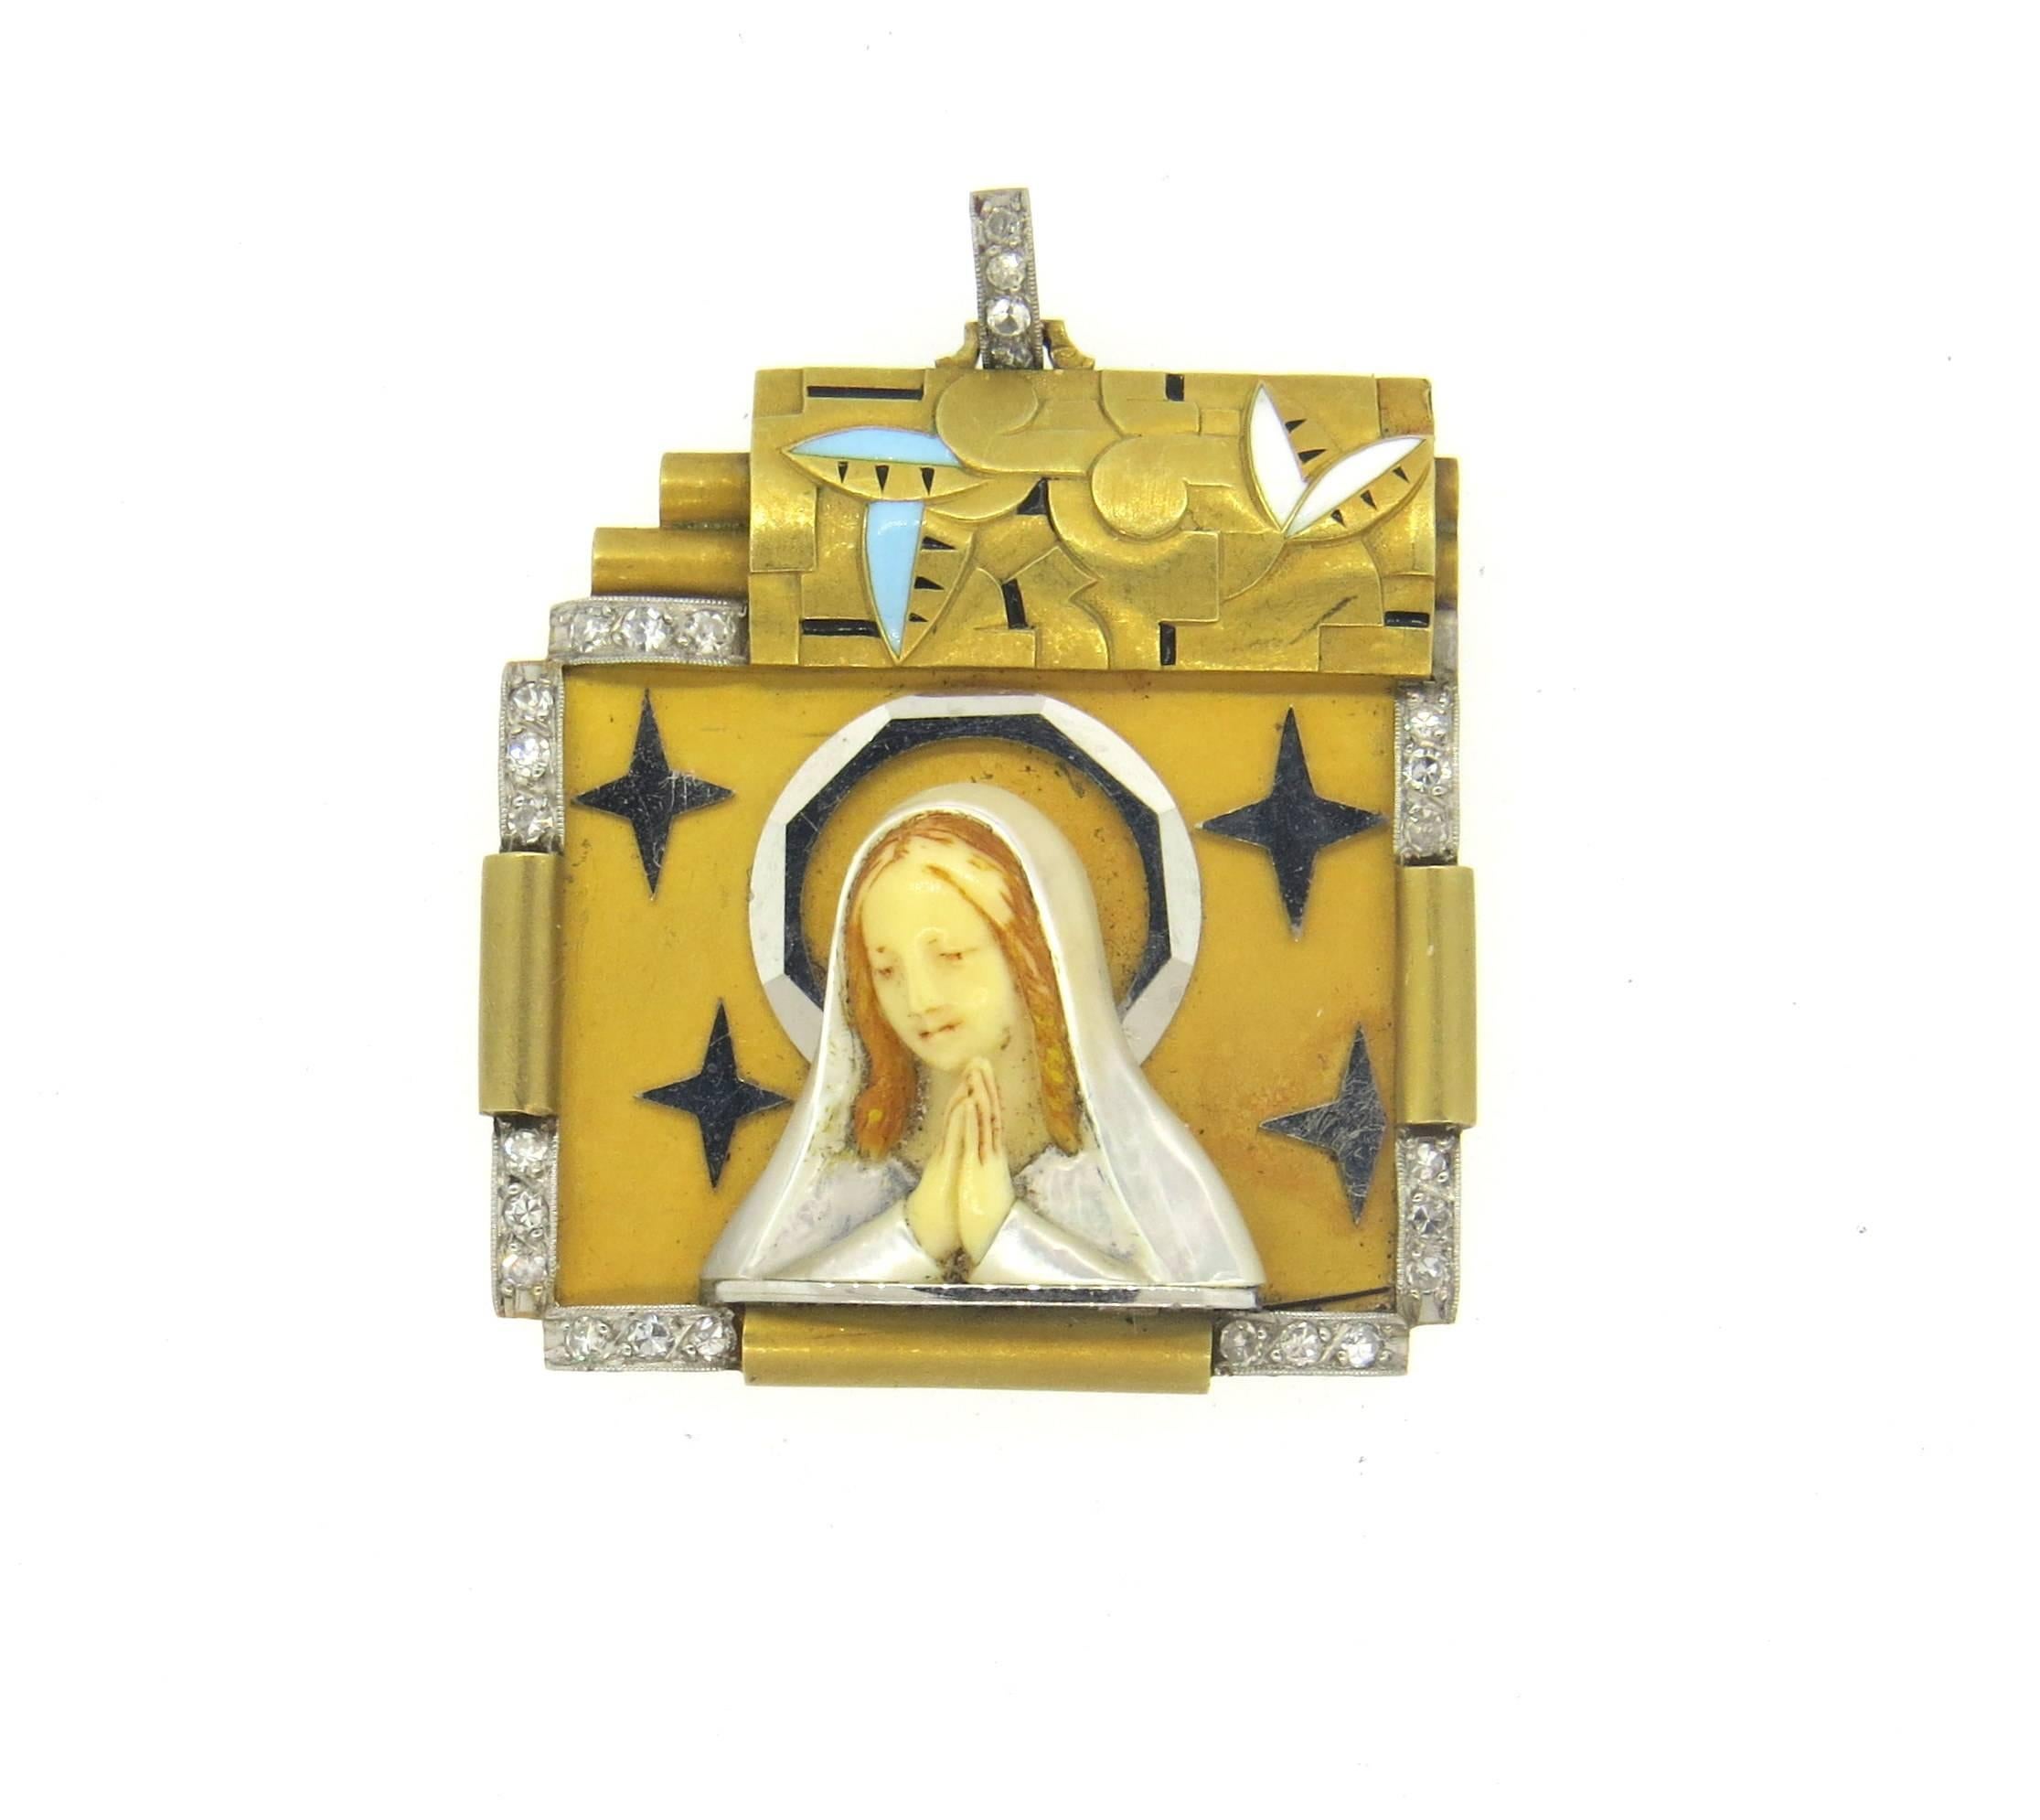 Exquisite Art Deco 18k yellow gold pendant, depicting St. Mary, decorated with diamonds , mother of pearl and enamel . Pendant measures 46mm with bale x 35mm wide. Weight of the piece - 21.9 grams 